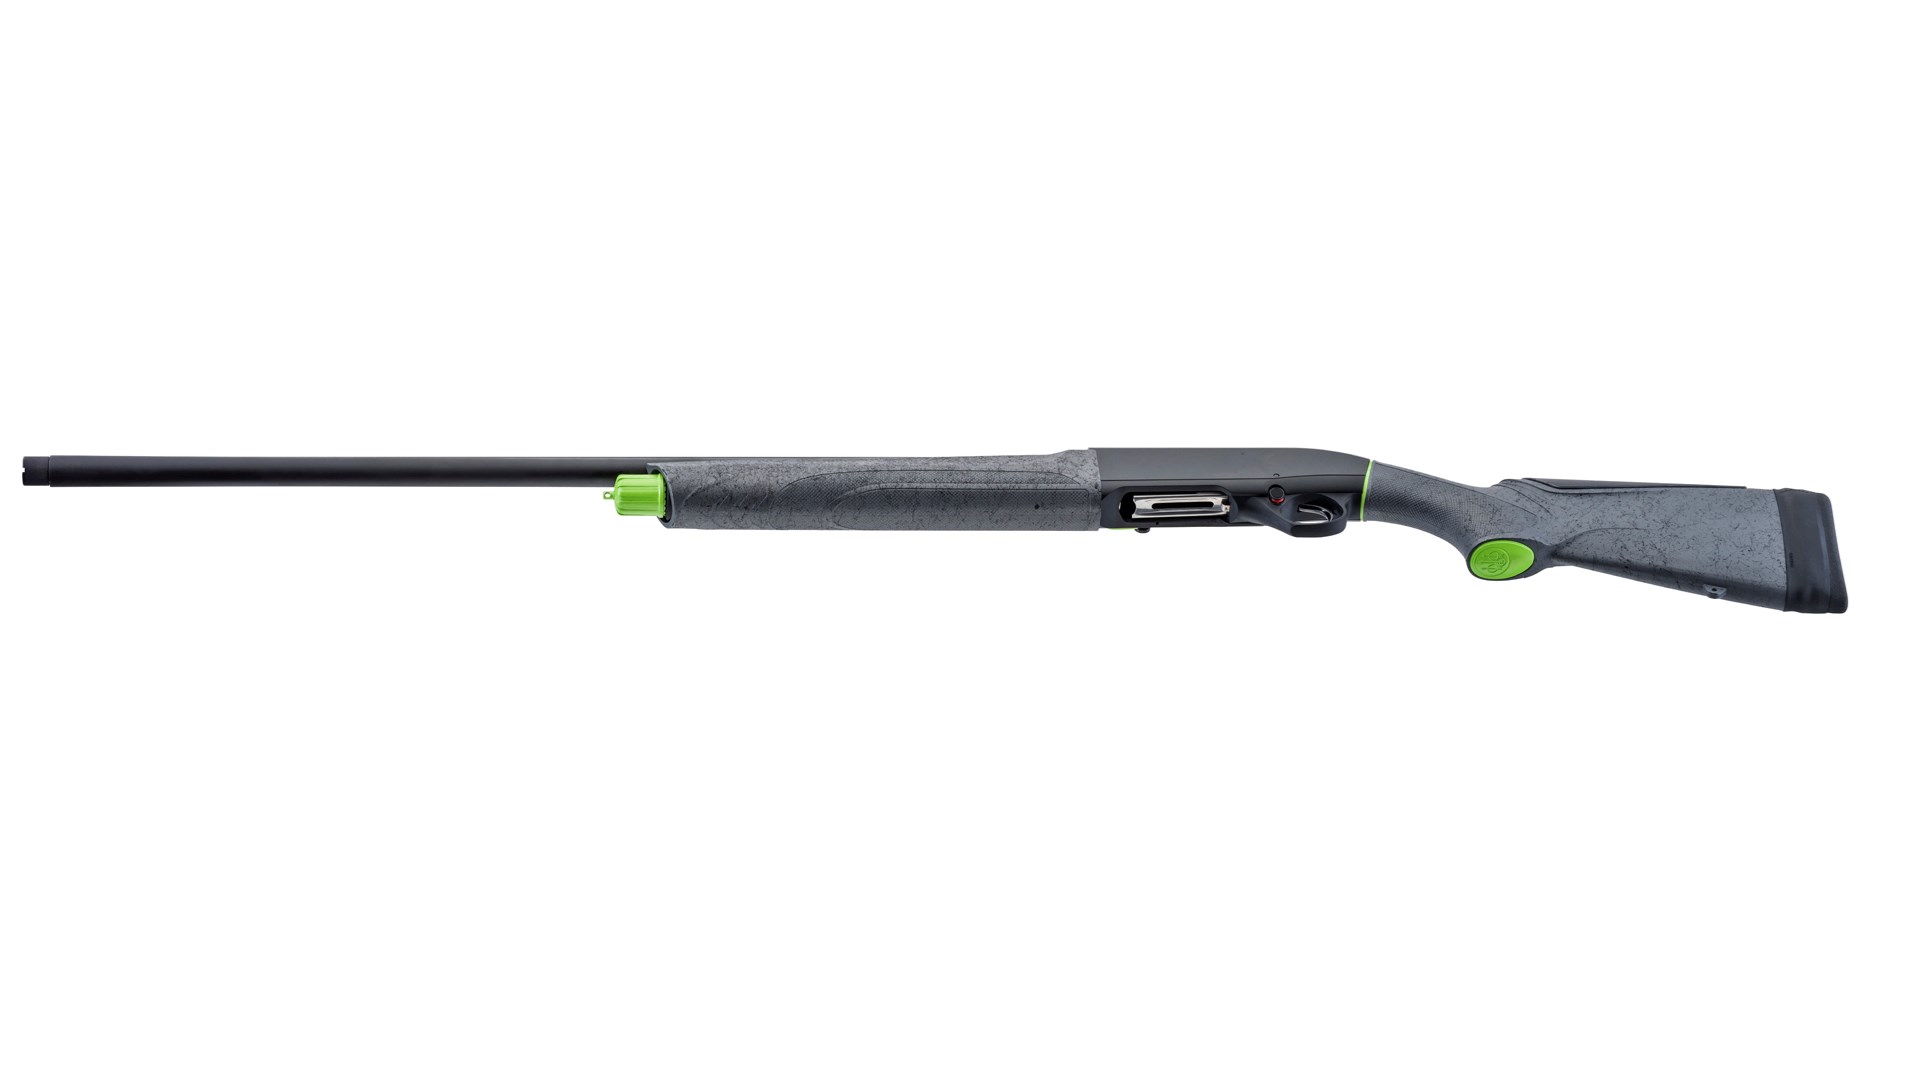 Underside of the Beretta A300 Ultima Sporting shotgun shown on a white background, along with lime-green highlights.